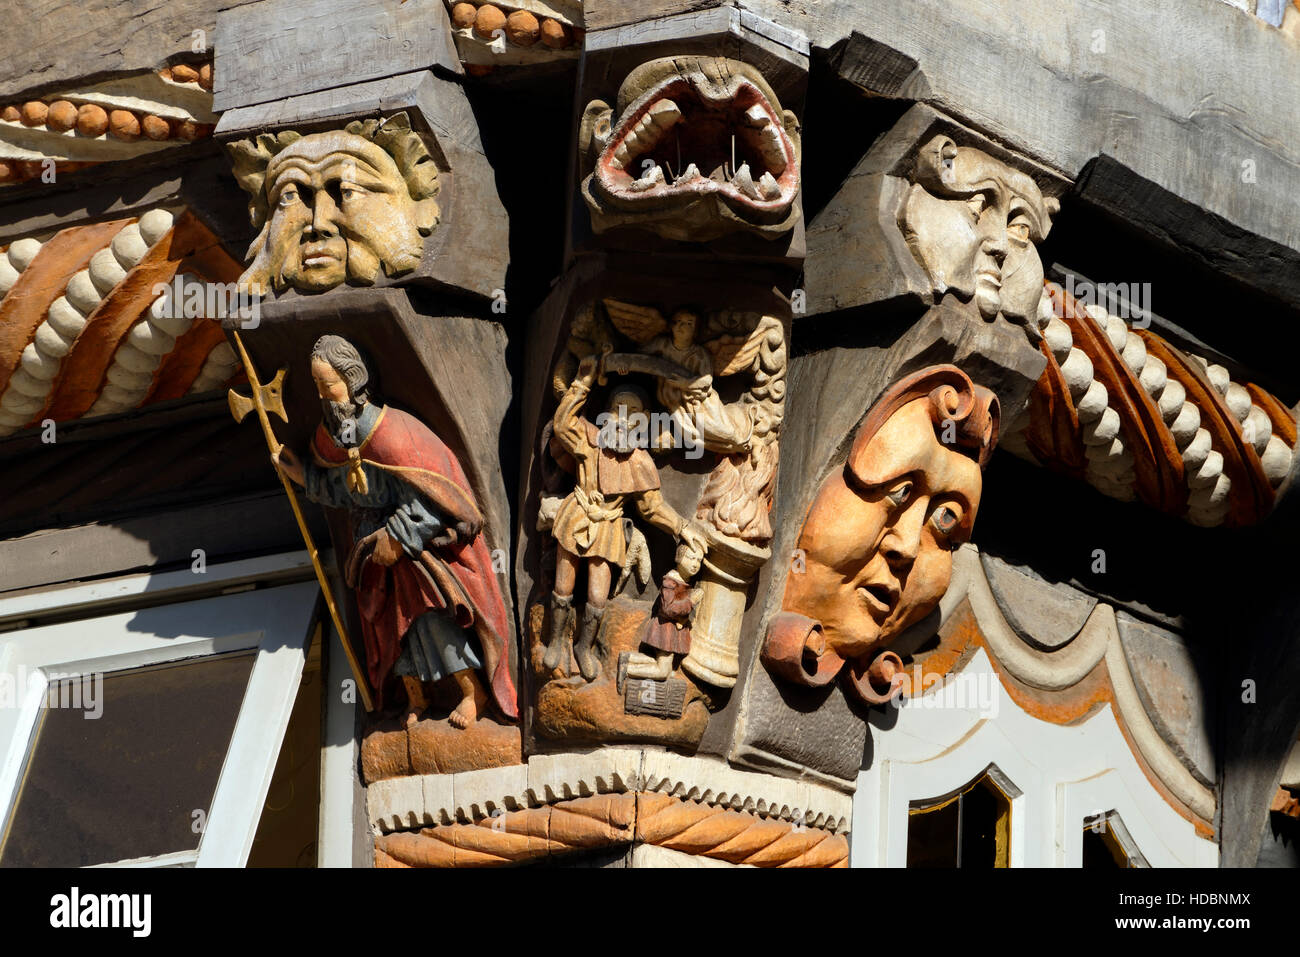 Hameln (Hamelin): Artwork (showing the Binding of Isaac) at the front of the Stiftsherrenhaus in Osterstraße, Weser Uplands, Lower Saxony, Germany Stock Photo